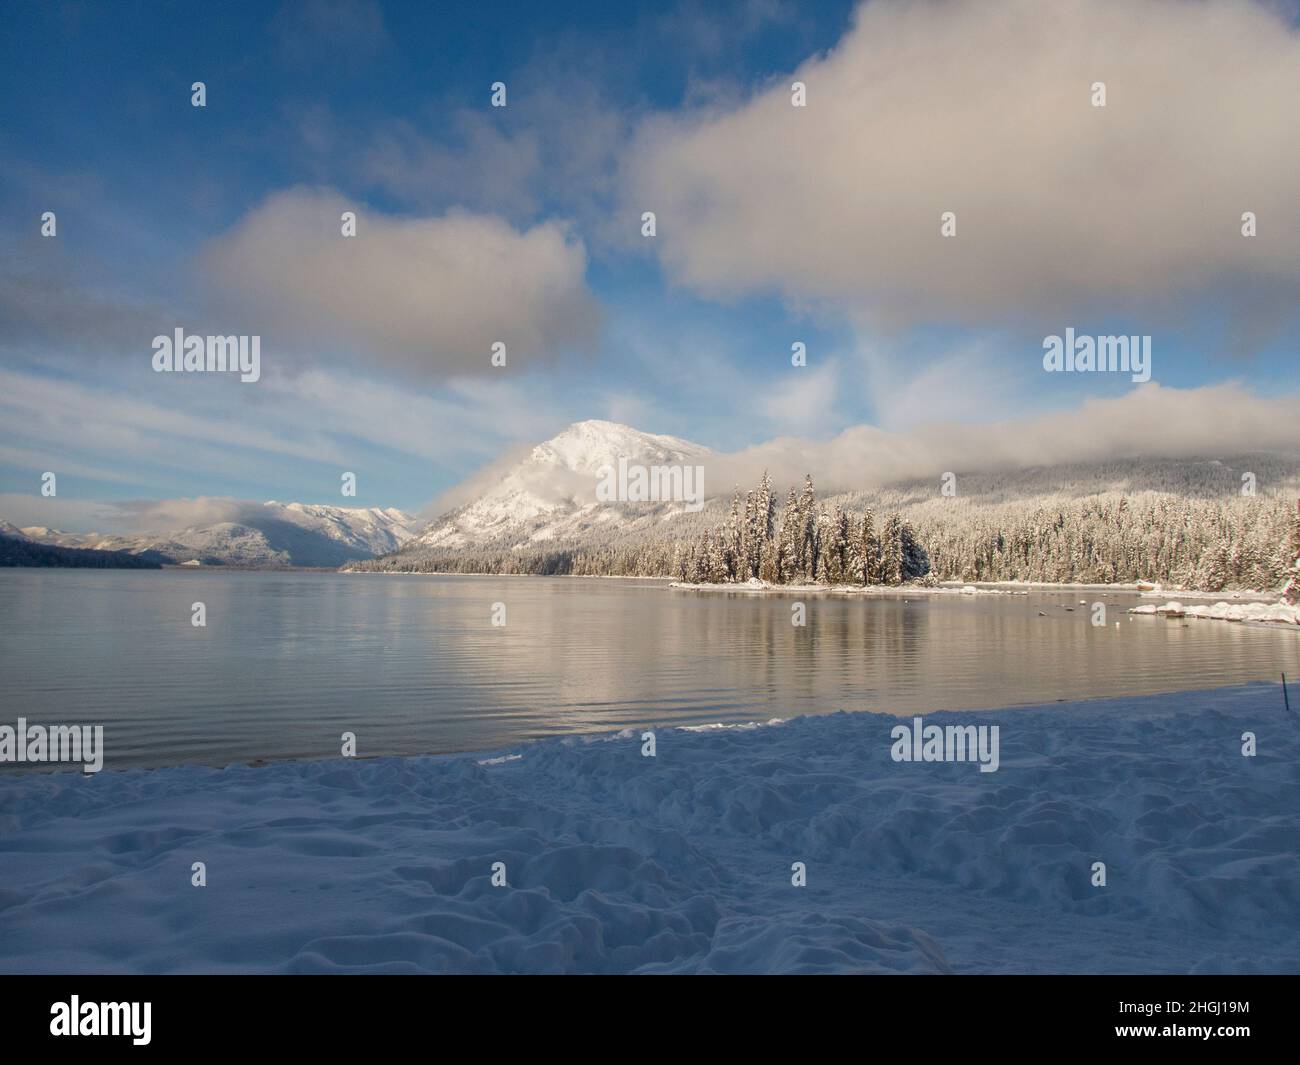 View of the shoreline and the snow-covered forest at Lake Wenatchee State Park in eastern Washington State, USA. Stock Photo